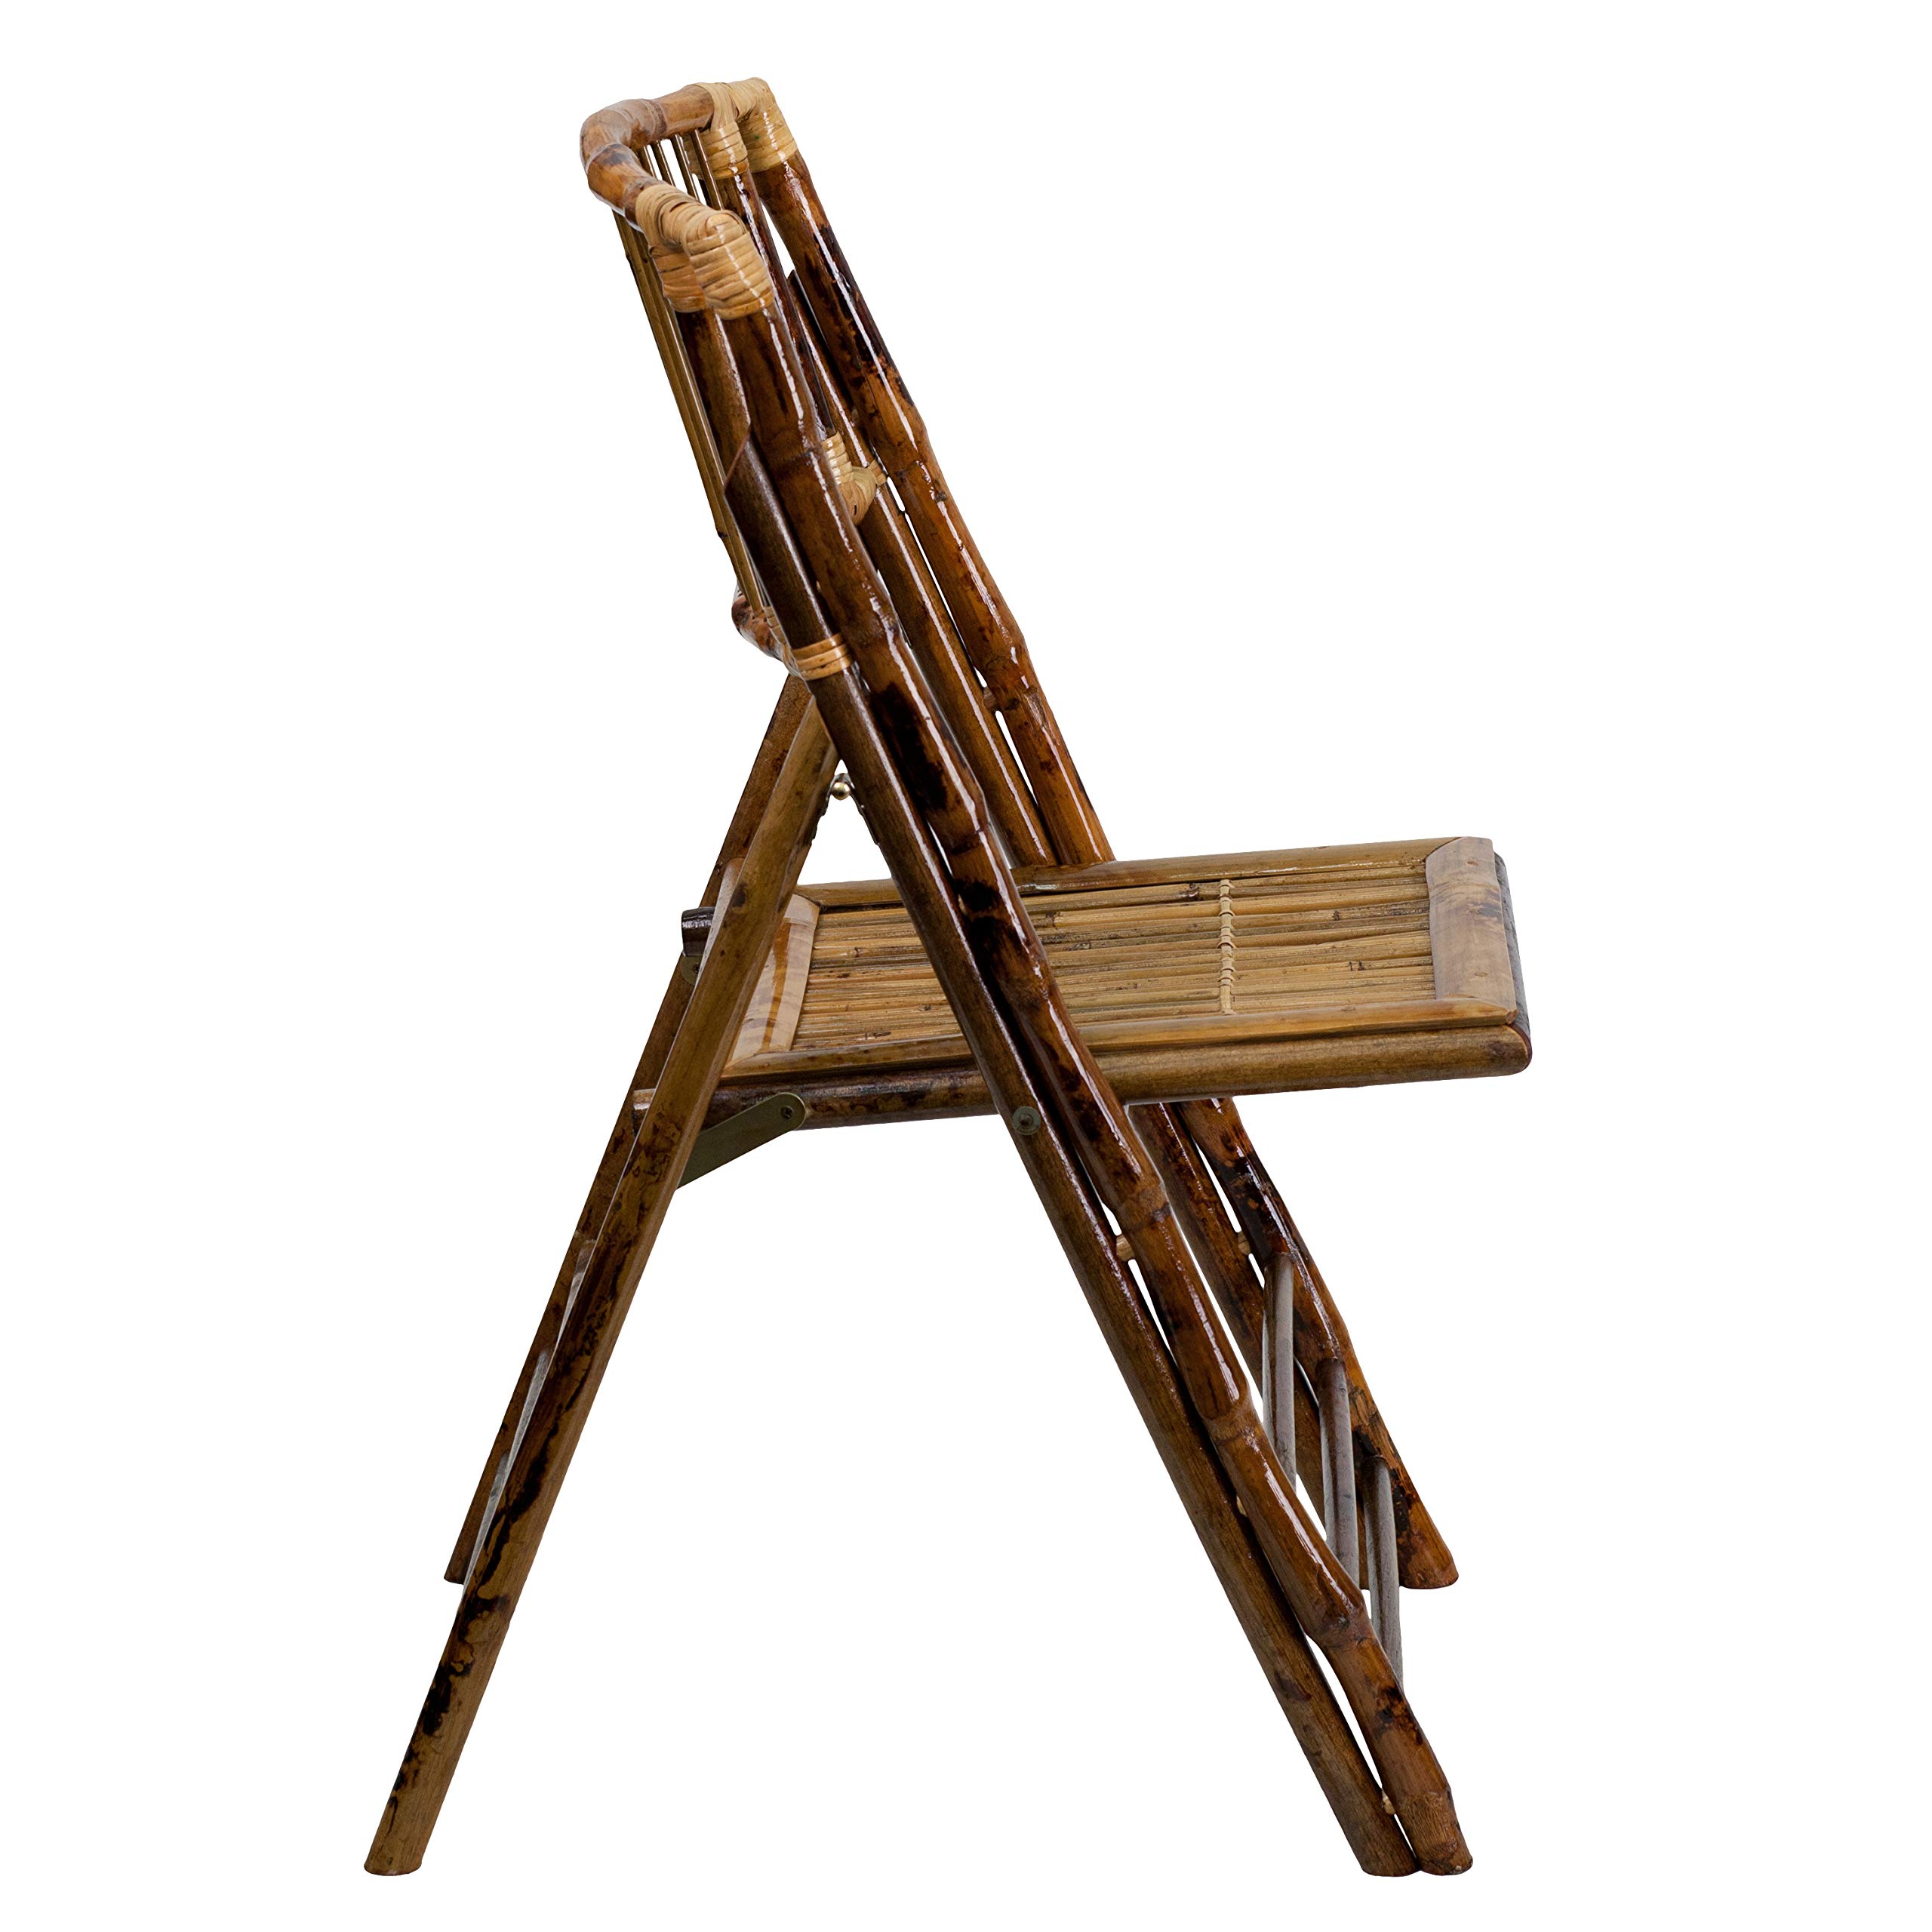 EMMA + OLIVER 2 Pack Commercial Event Party Rental Bamboo Folding Chair